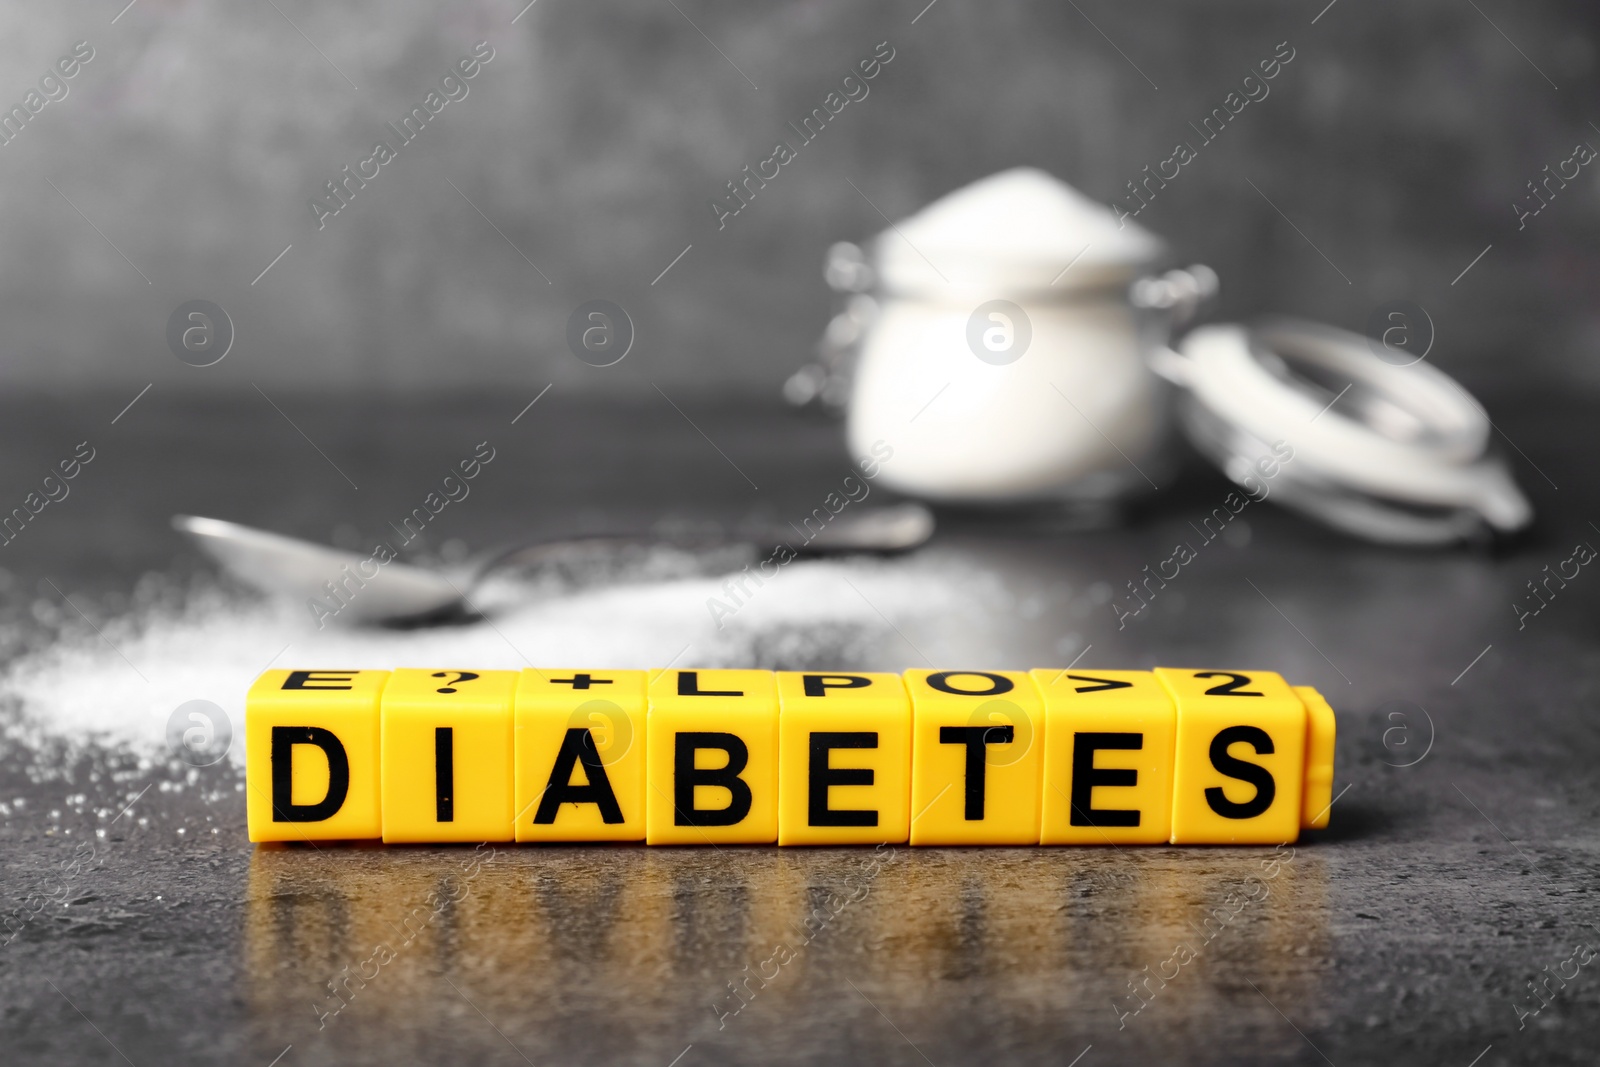 Photo of Word DIABETES made of cubes on table